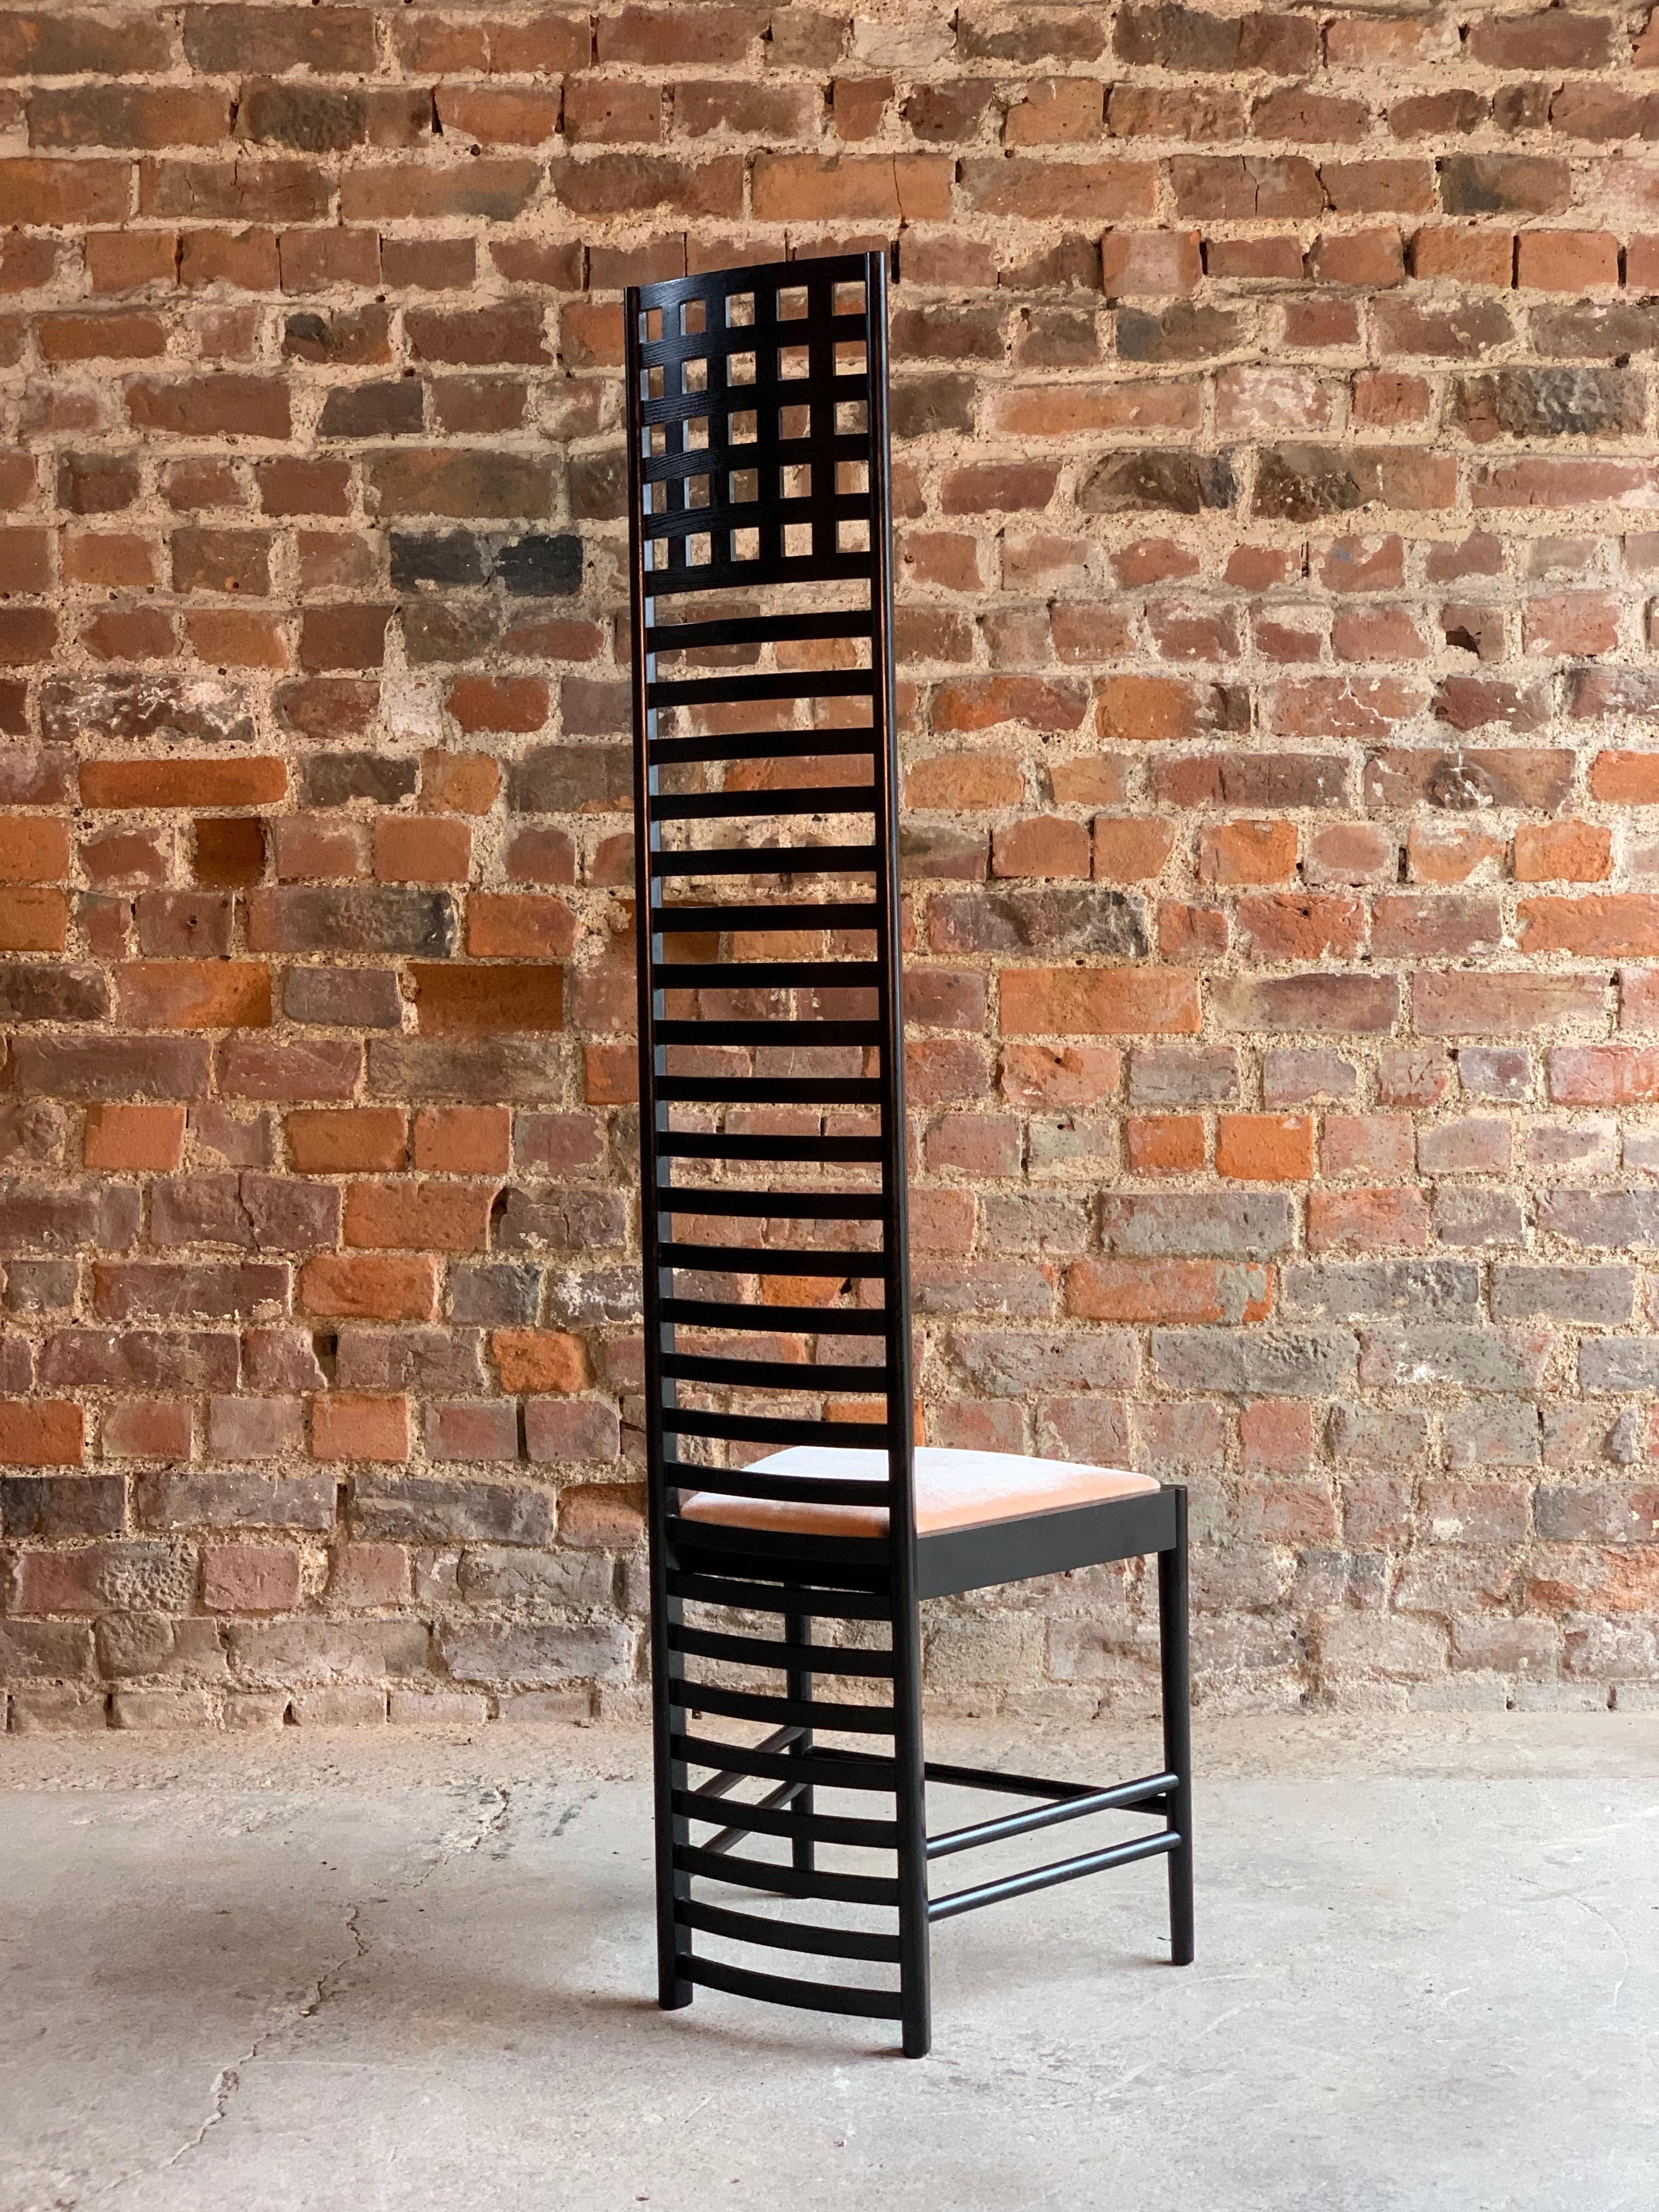 Charles Renee Mackintosh Hill House 1 Chair by Cassina, 1995 2